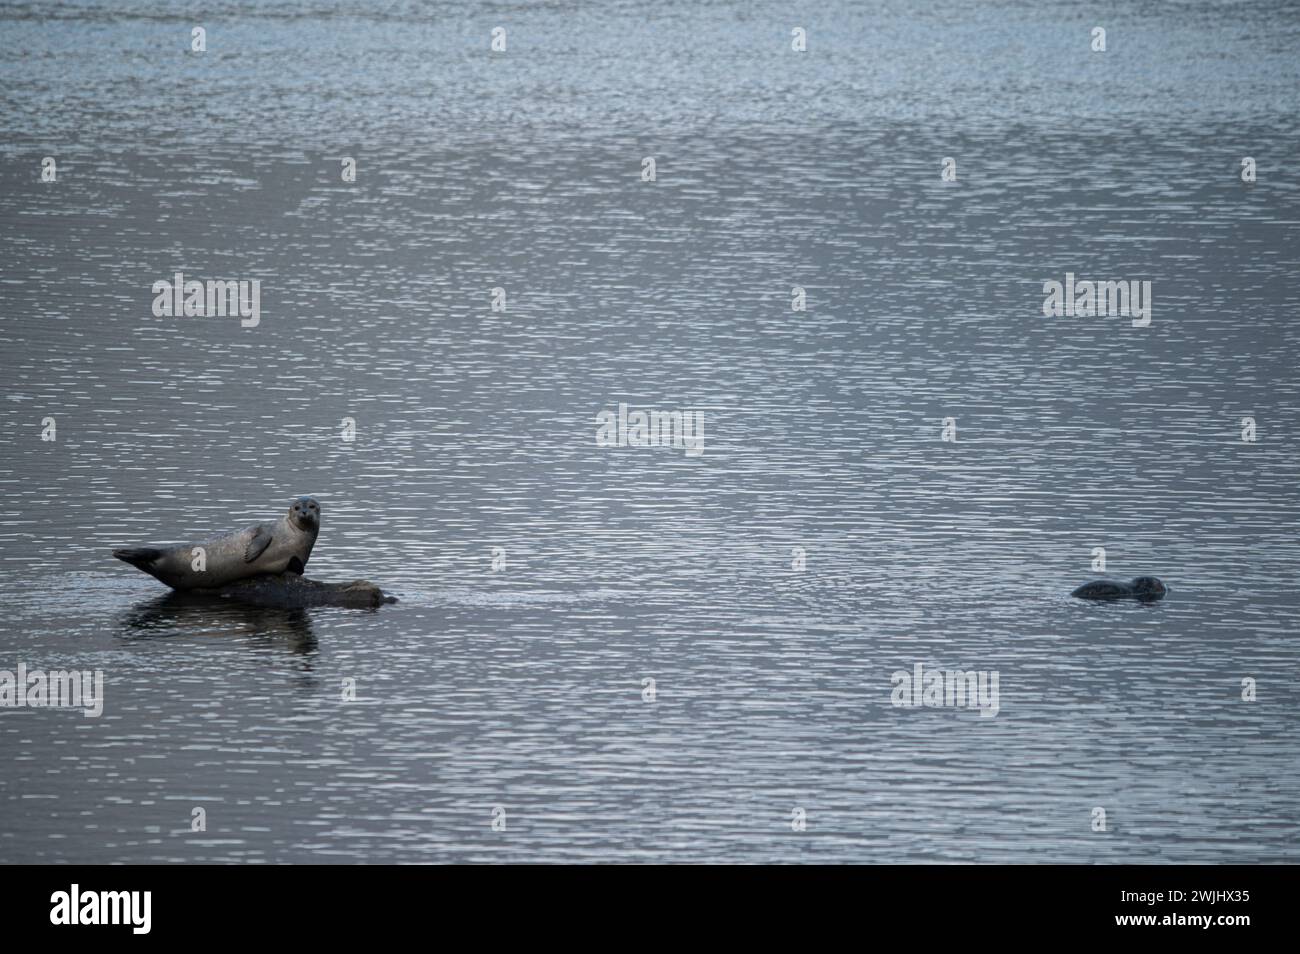 Solitary seal on glacial ice, a serene moment in the vast icy waters of Iceland. Stock Photo